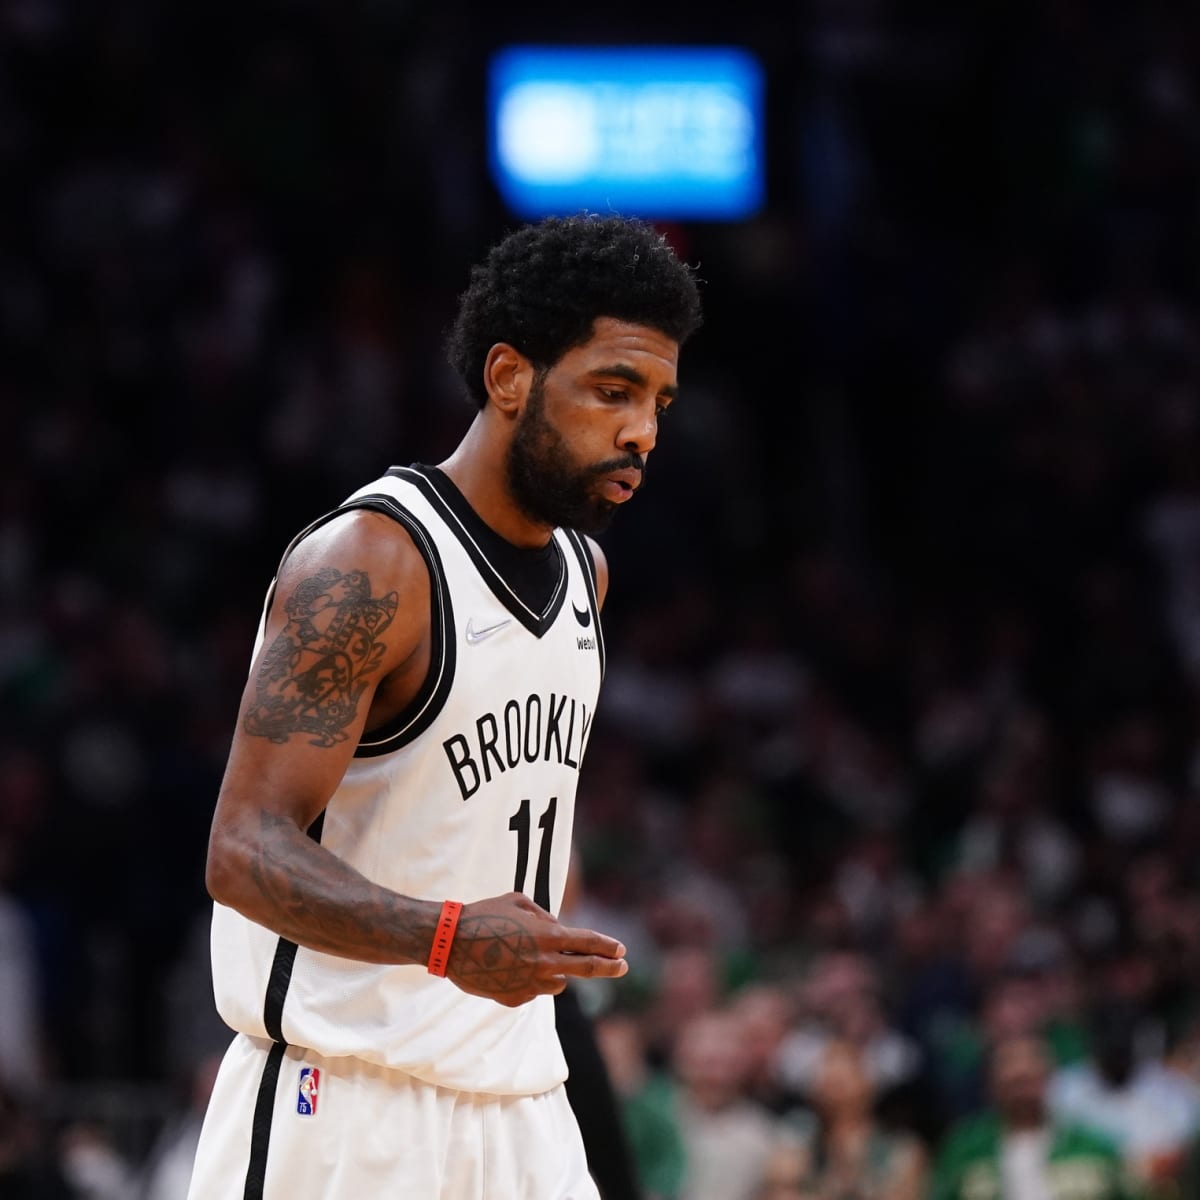 Sean Marks Talks the Future of James Harden, Kyrie Irving